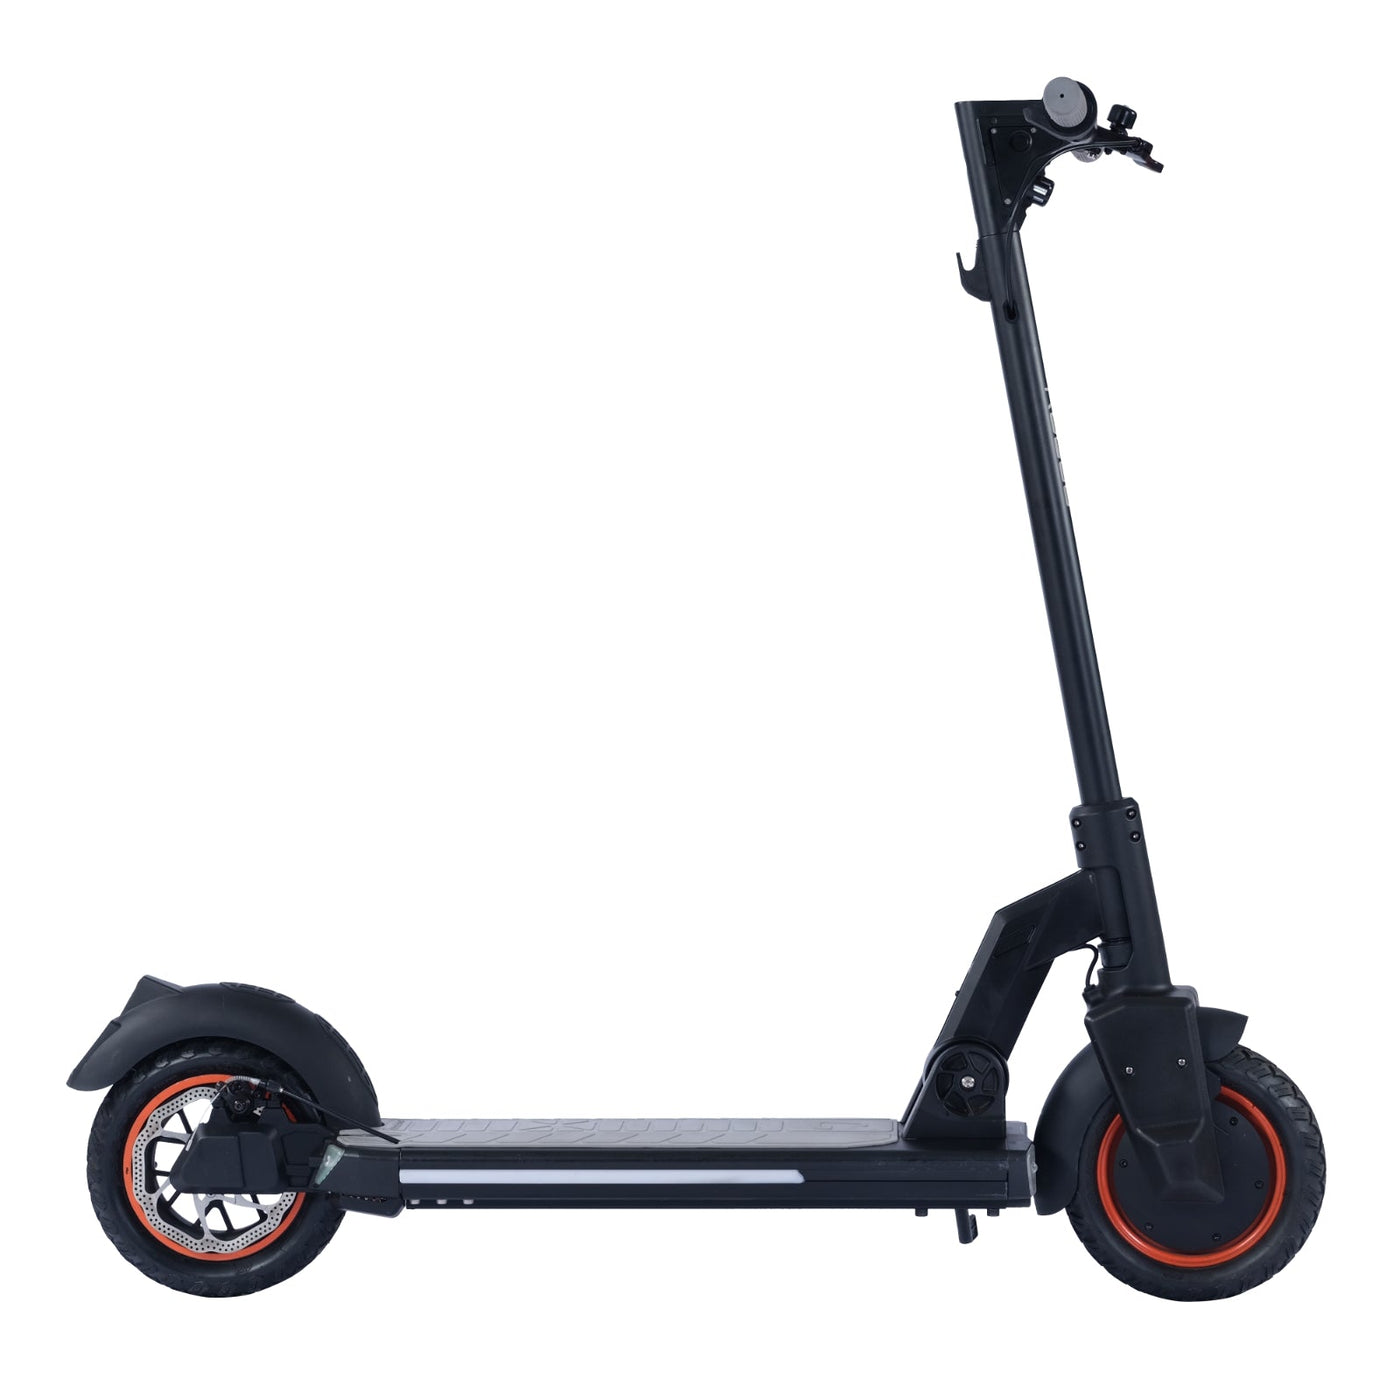 KUGOO G5 Commuting Electric Scooter